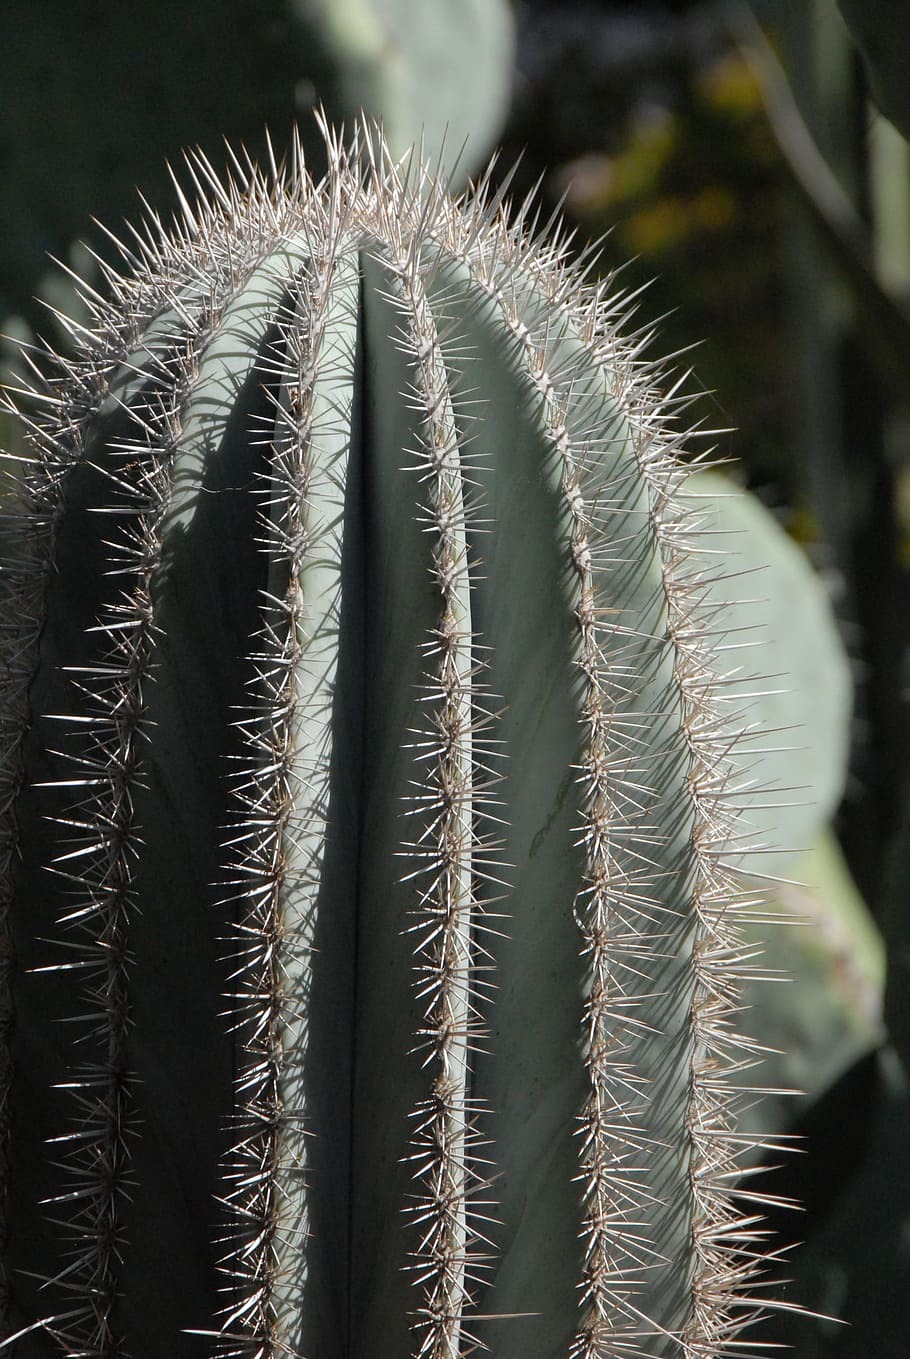 Cactus, Needle, Morocco, Marrakech, light, garden, chart, against day, spice, plant